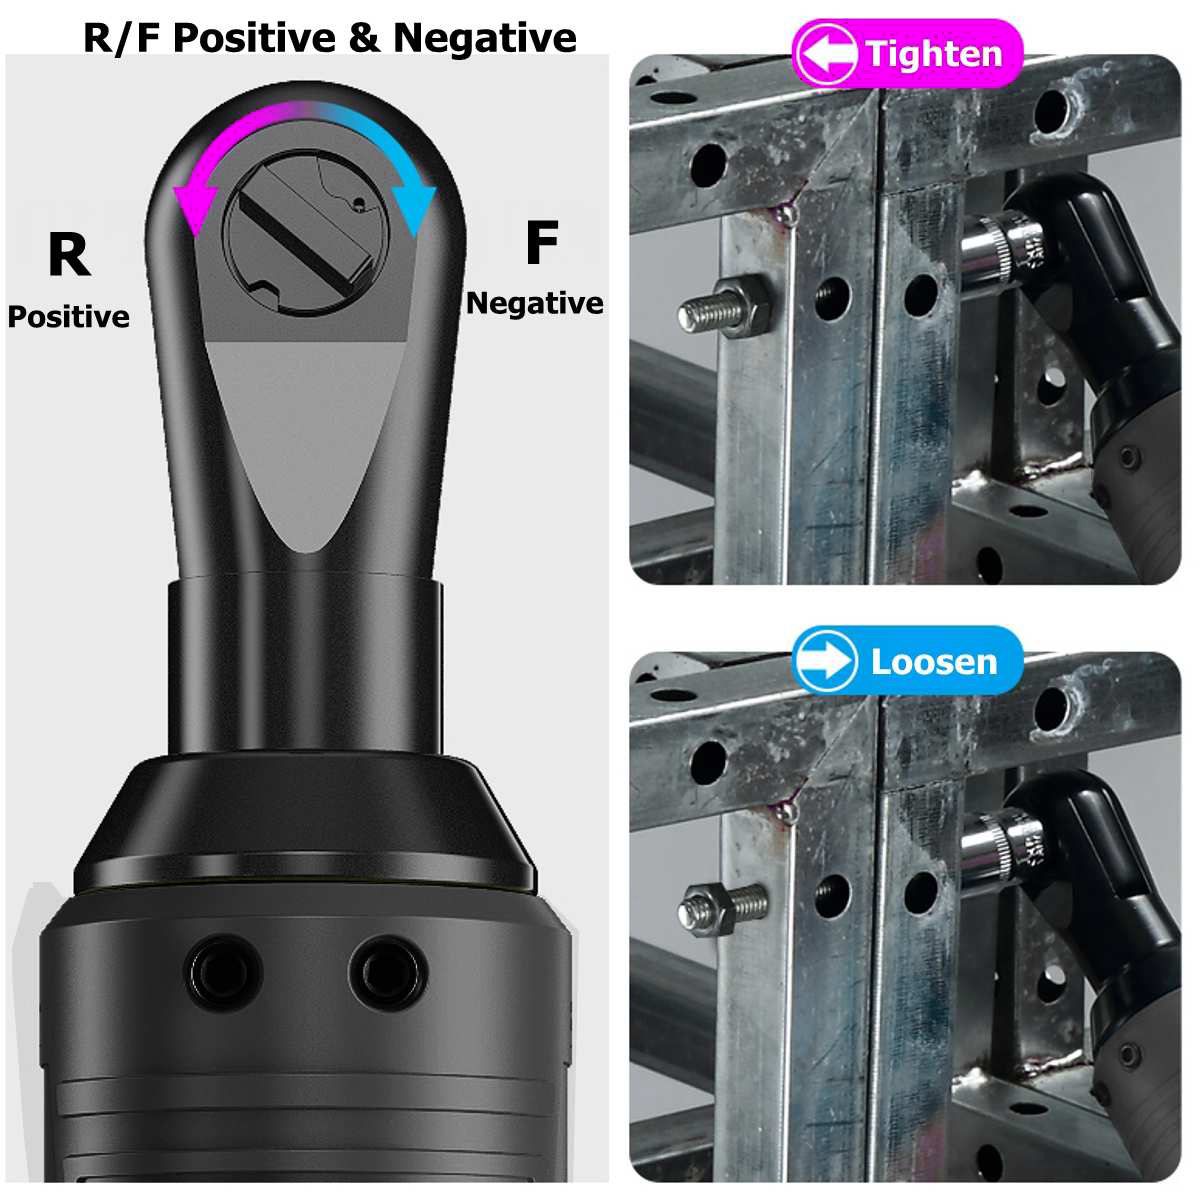 Becornce 18V 100N.m Electric Wrench 3/8 Cordless Ratchet Rechargeable Scaffolding Right Angle Wrench Tool with 1/2 Battery